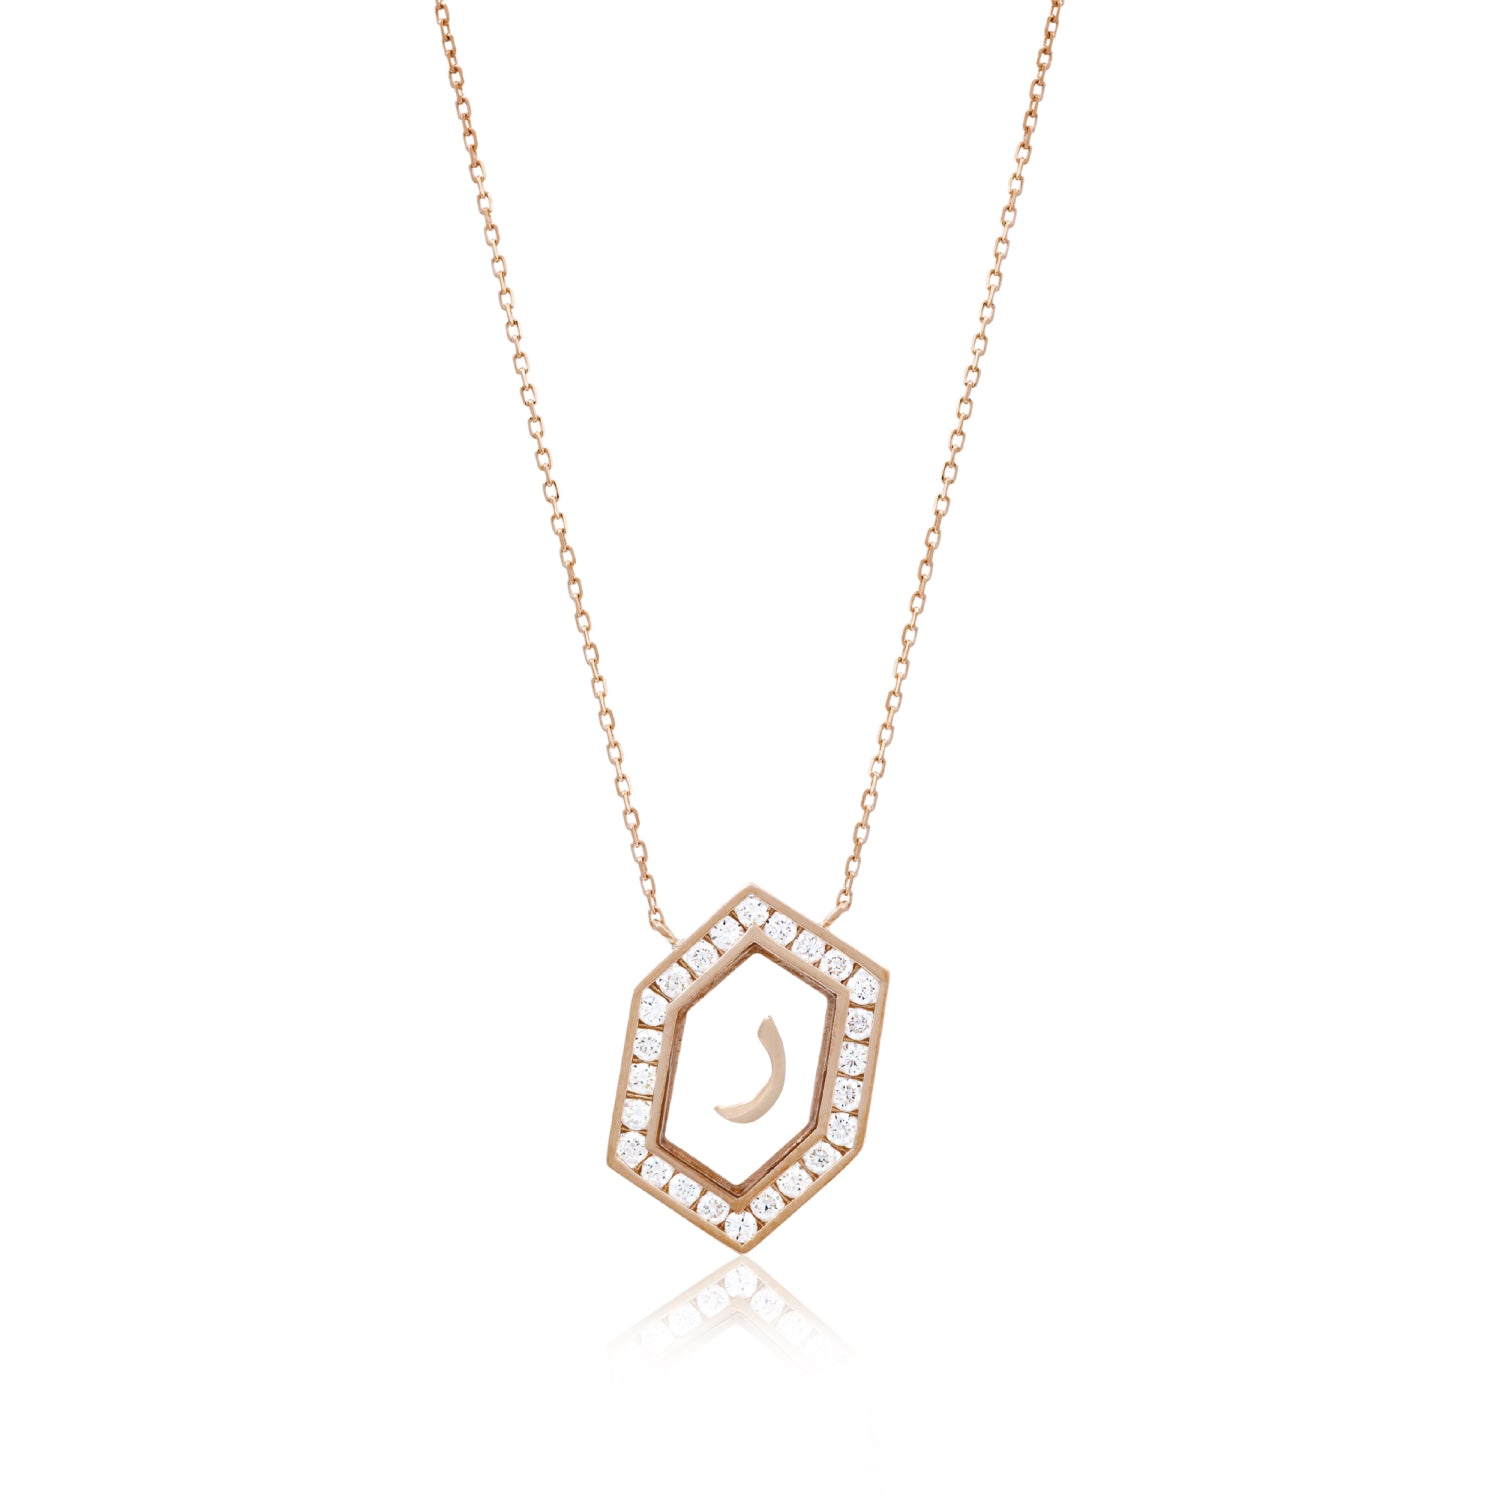 Qamoos 1.0 Letter ر Diamond Necklace in Rose Gold